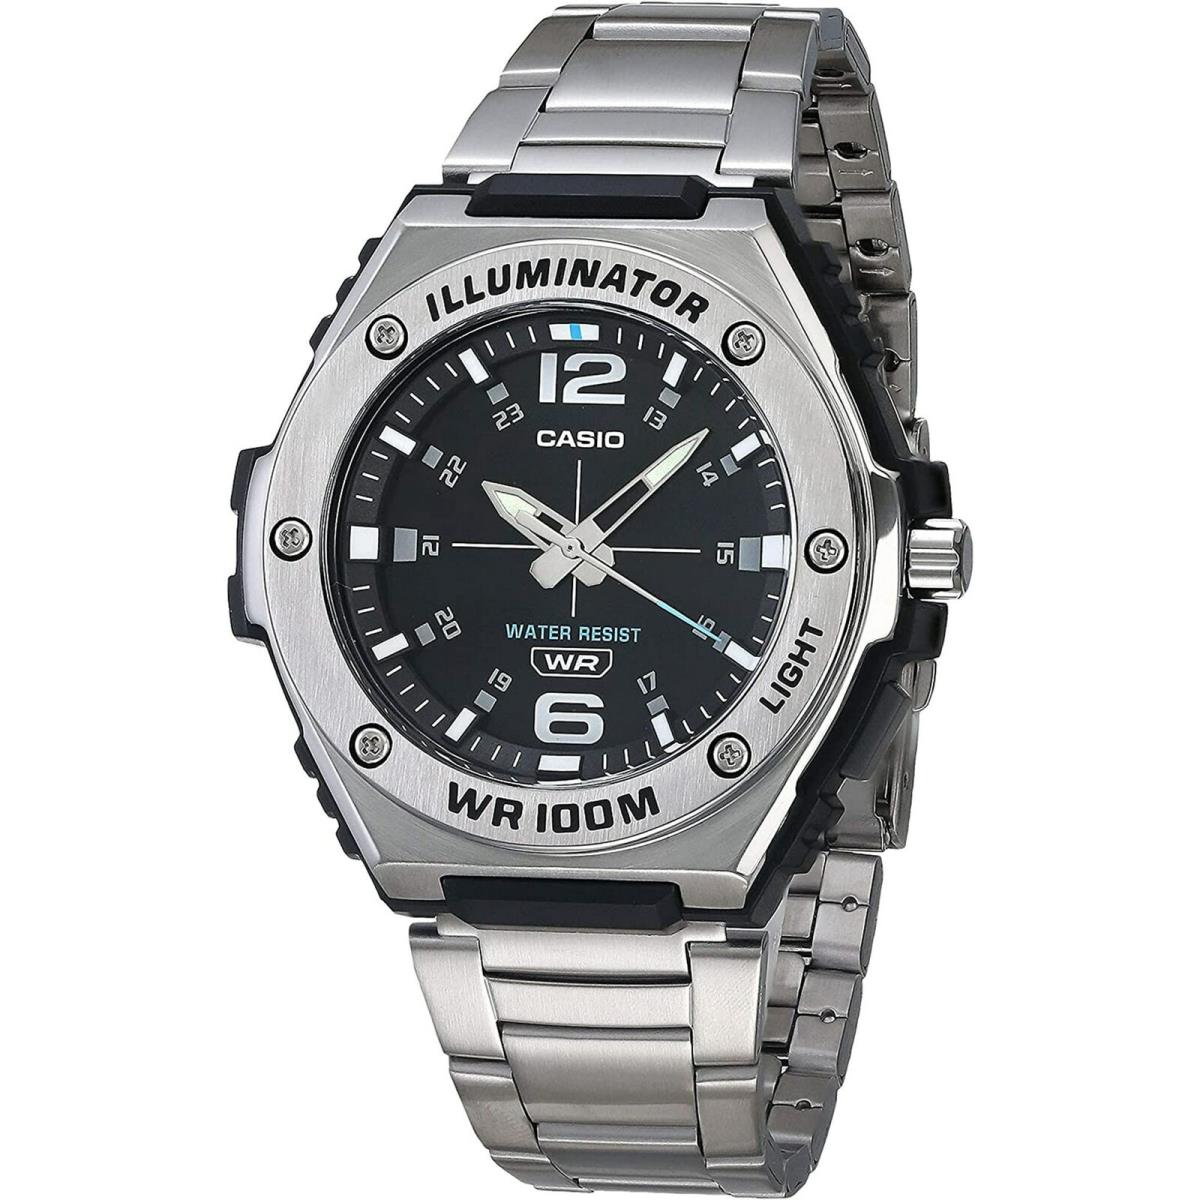 Casio MWA100HD-1A Men`s Illuminator Analog Black Dial Stainless Steel Band Watch - Dial: Black, Band: Silver, Bezel: Silver